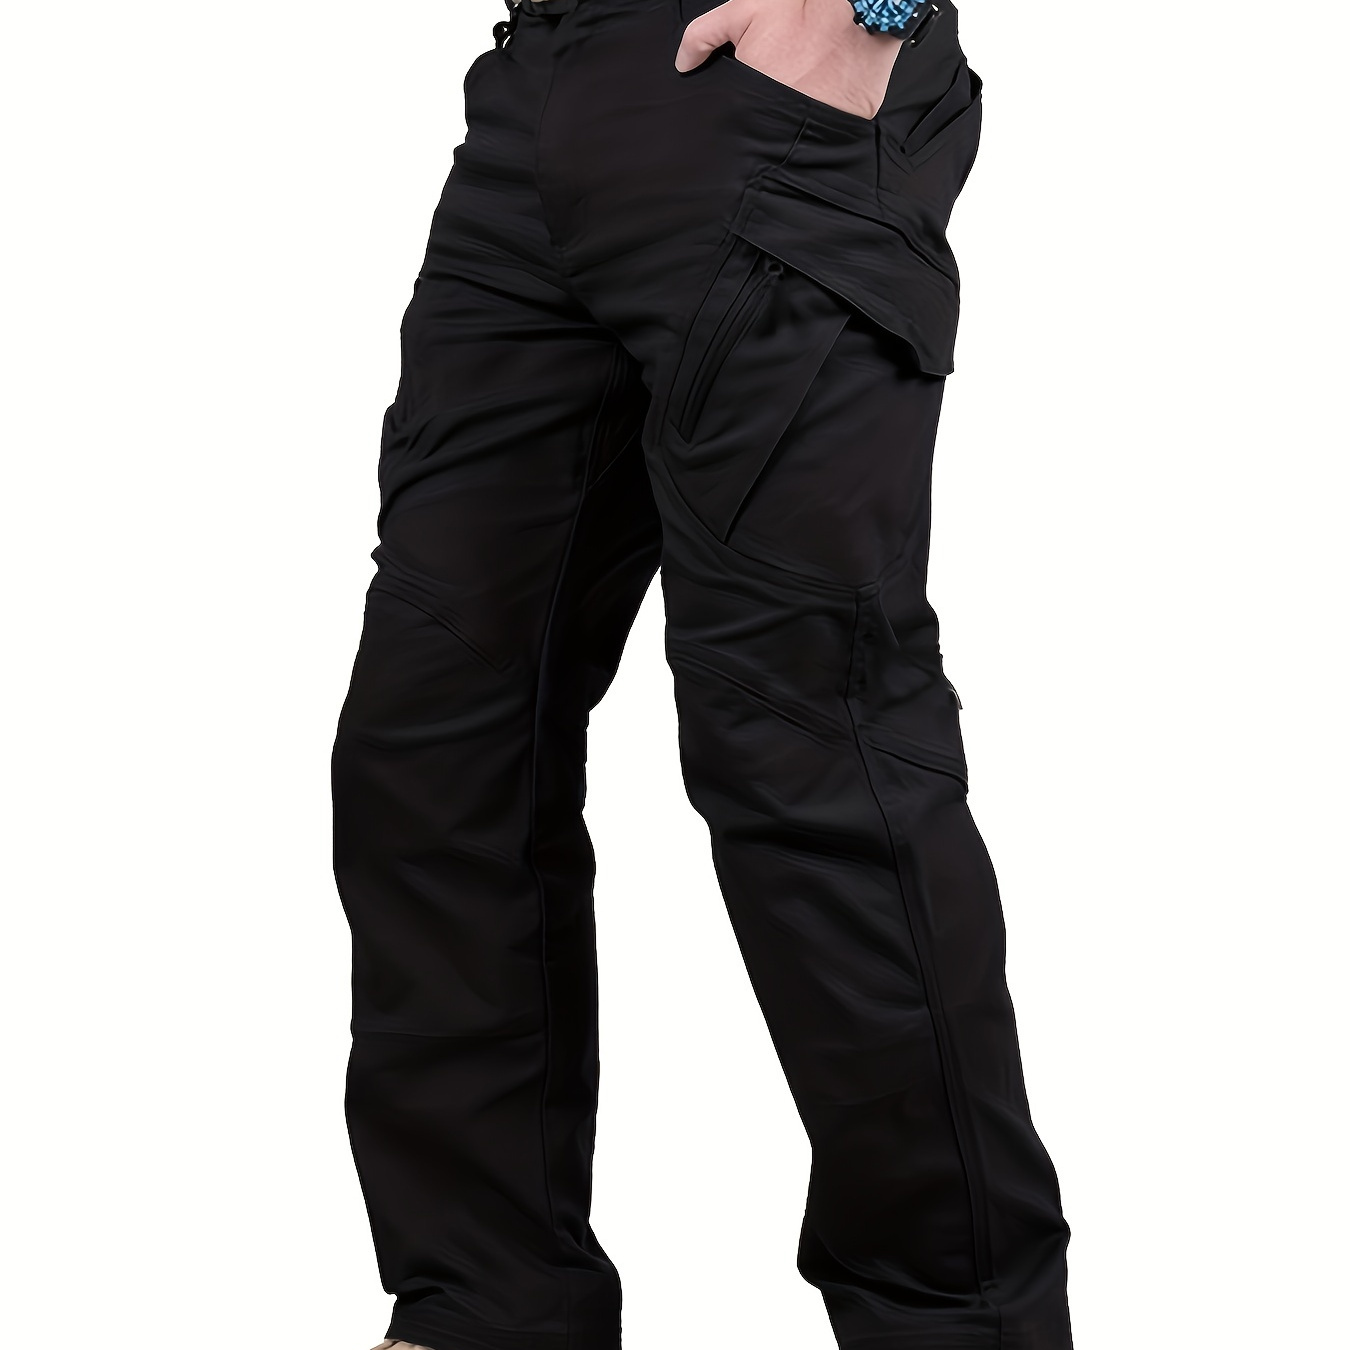 City Military Tactical Pants Men ​Combat Army Trousers Men Many Pockets  Waterproof Casual Cargo Pants Sweatpant